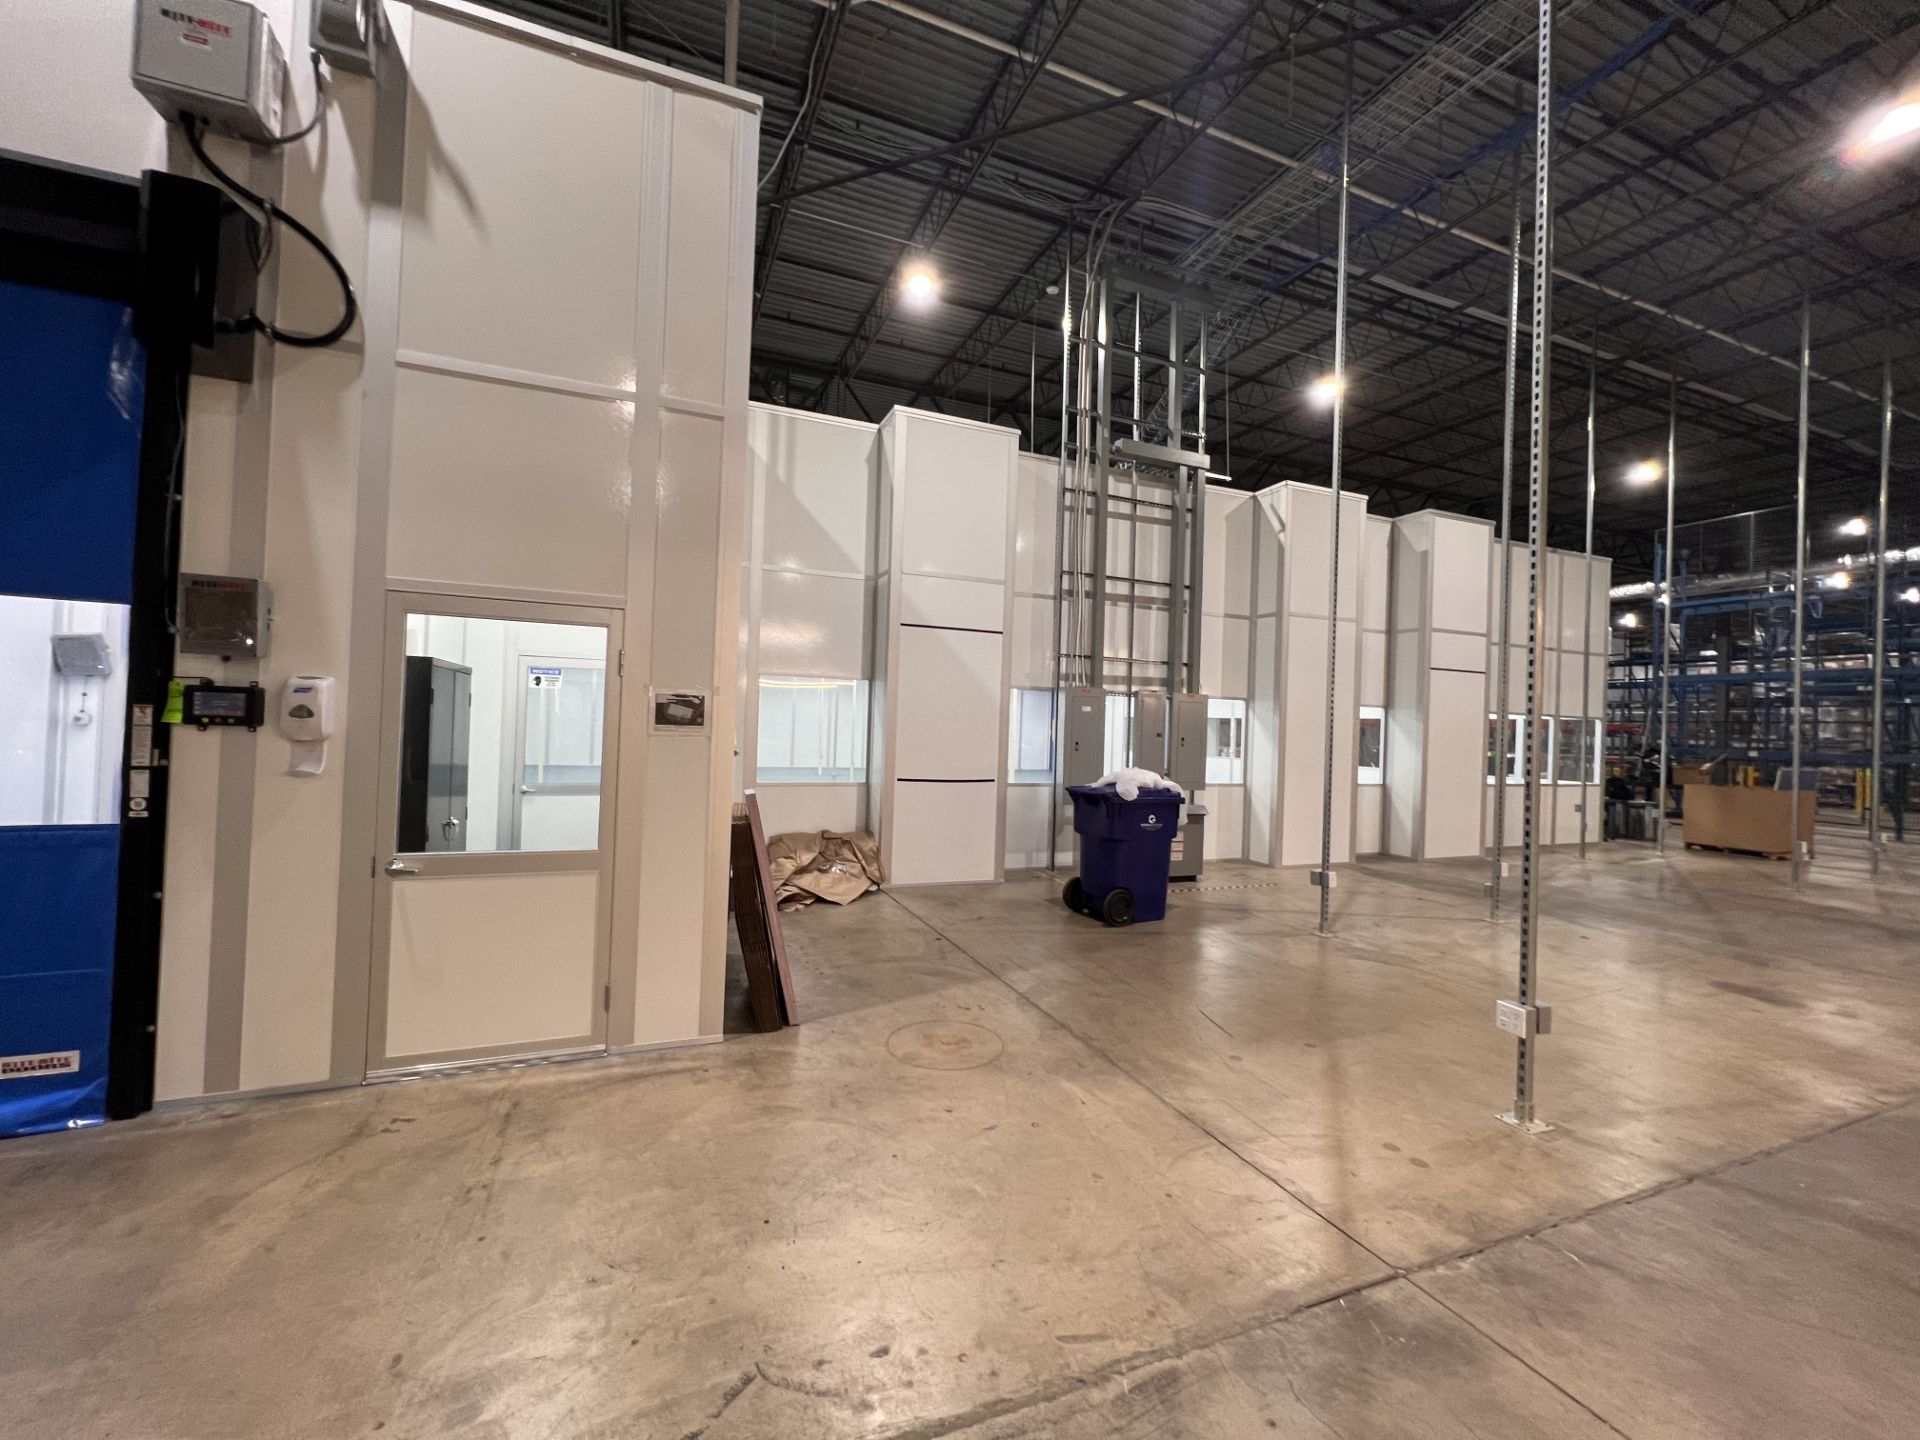 MODULAR CLEAN ROOM, APPROX. 60 FT X 60 FT X 11 FT 10 IN, INCLUDES HEPA FILTRATION UNITS - Image 16 of 34